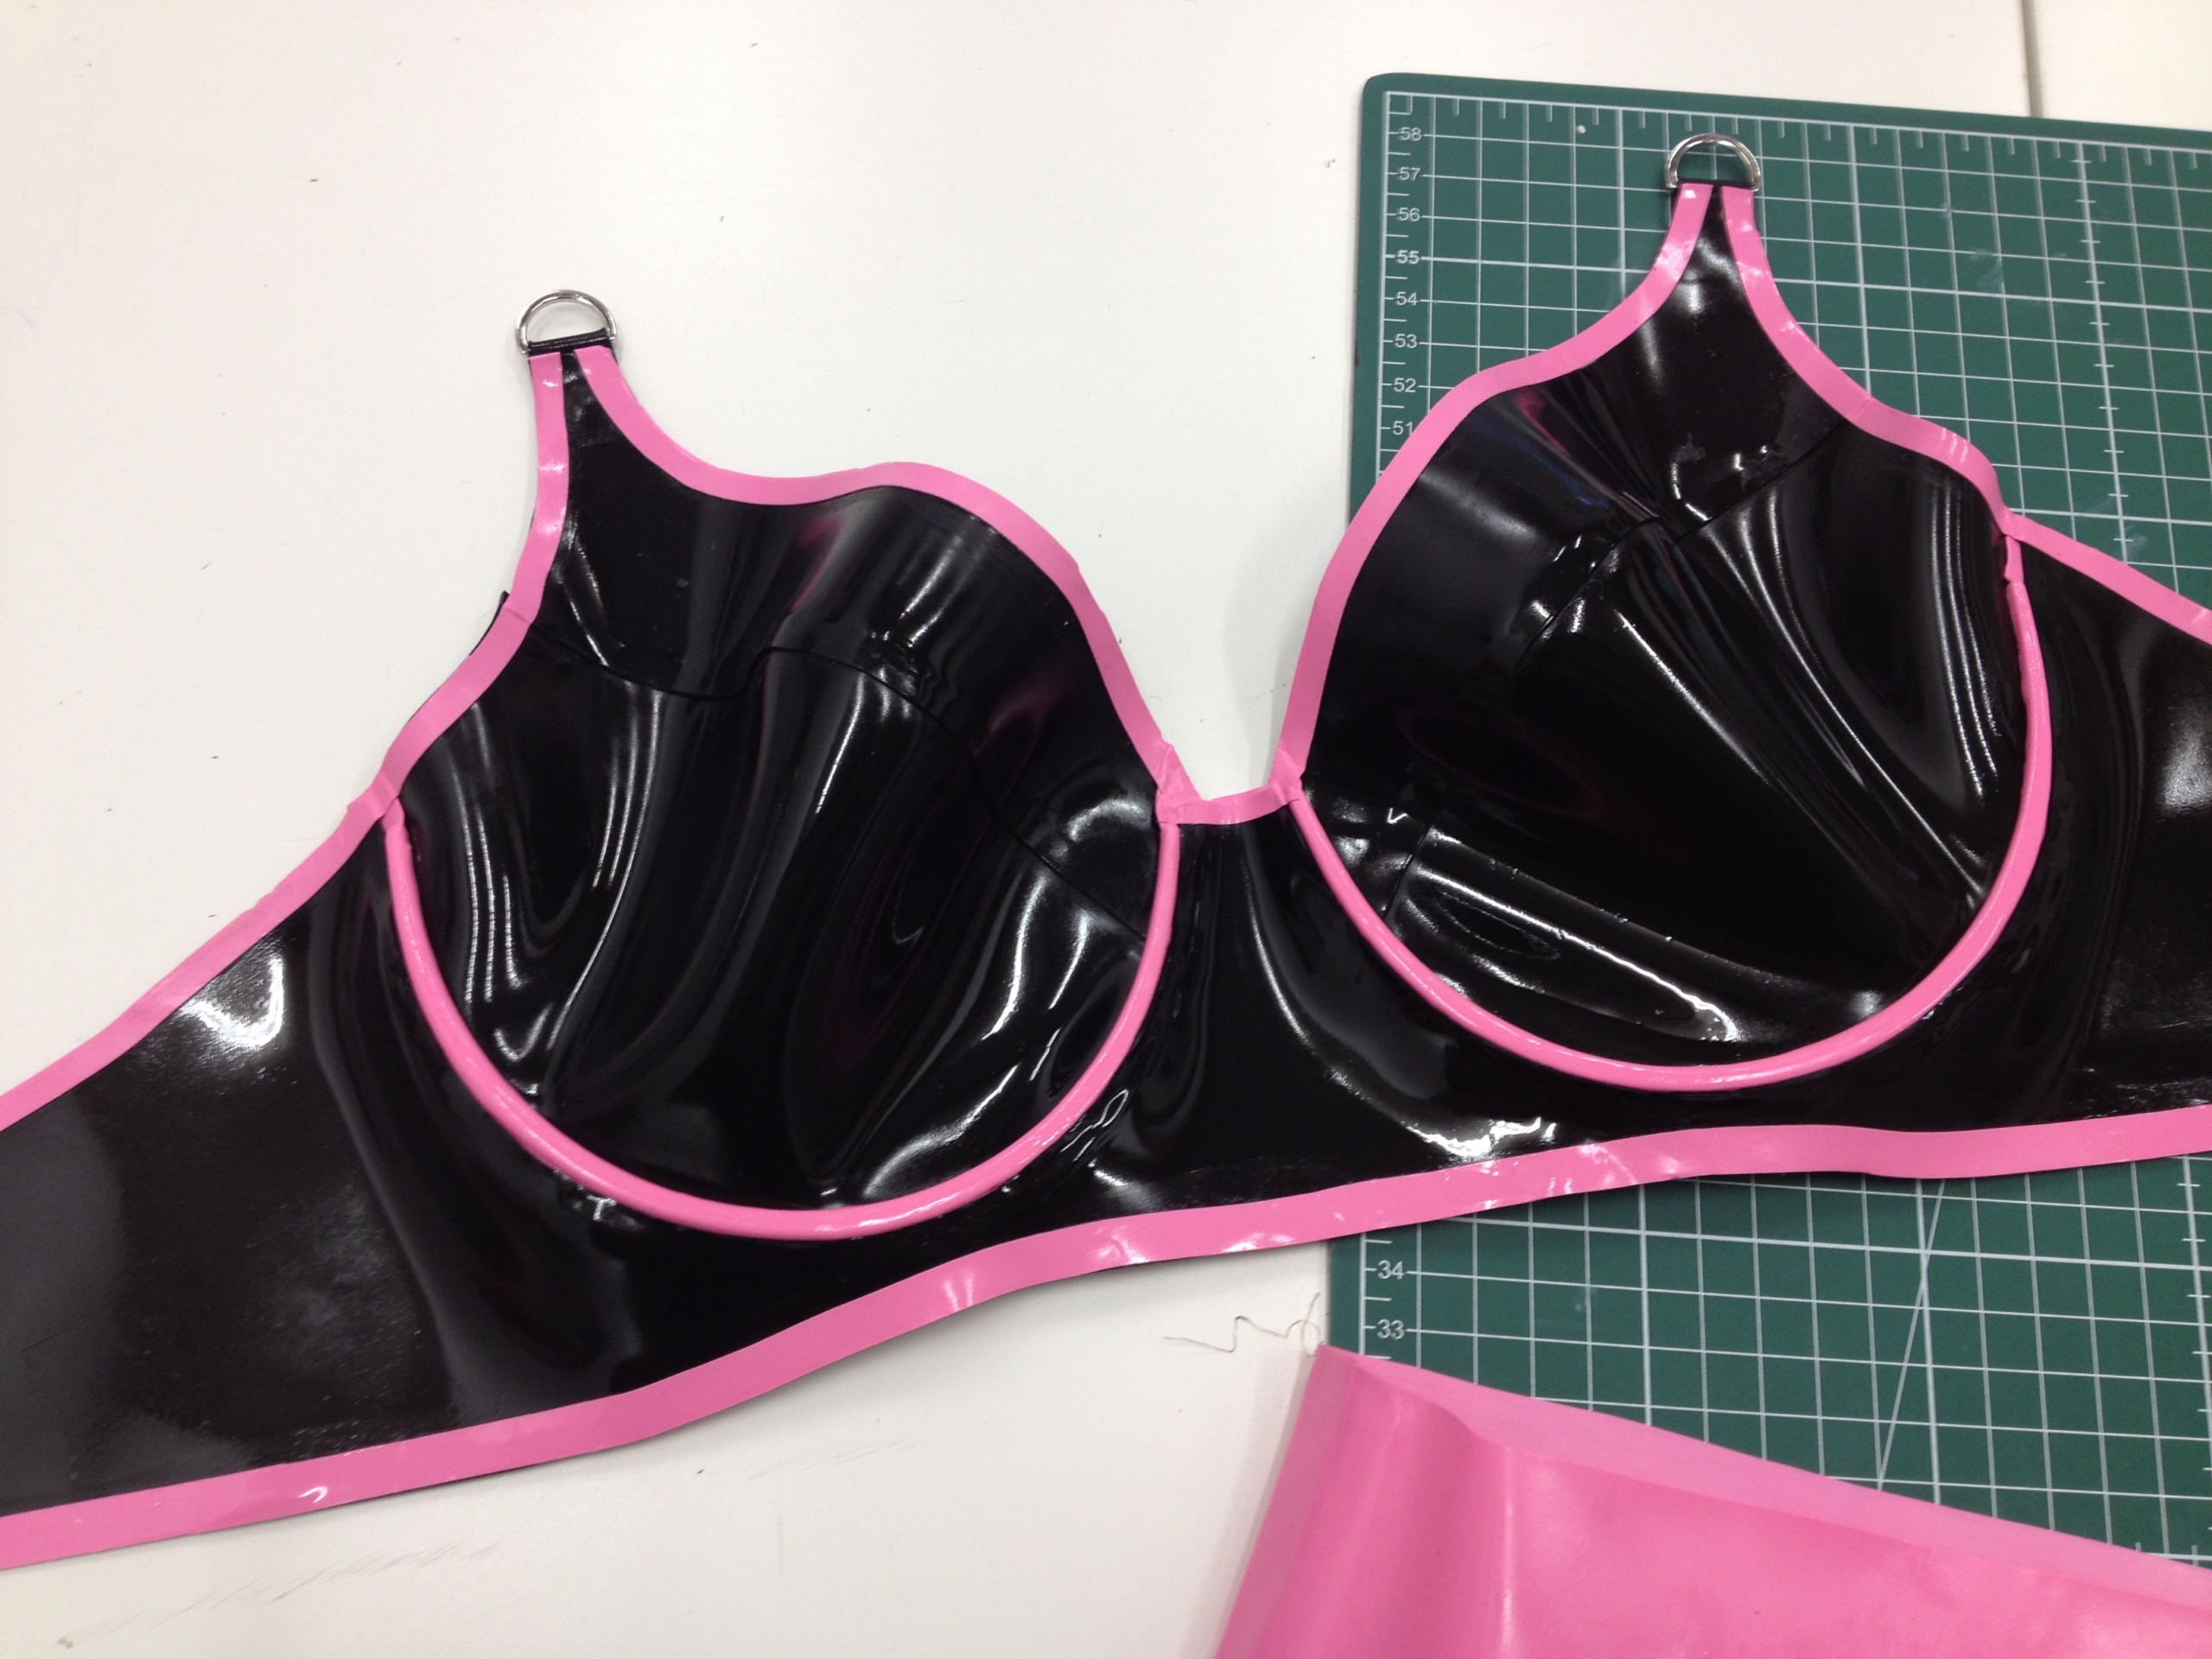 sew with latex Archives - Bra-makers Supply the leading global